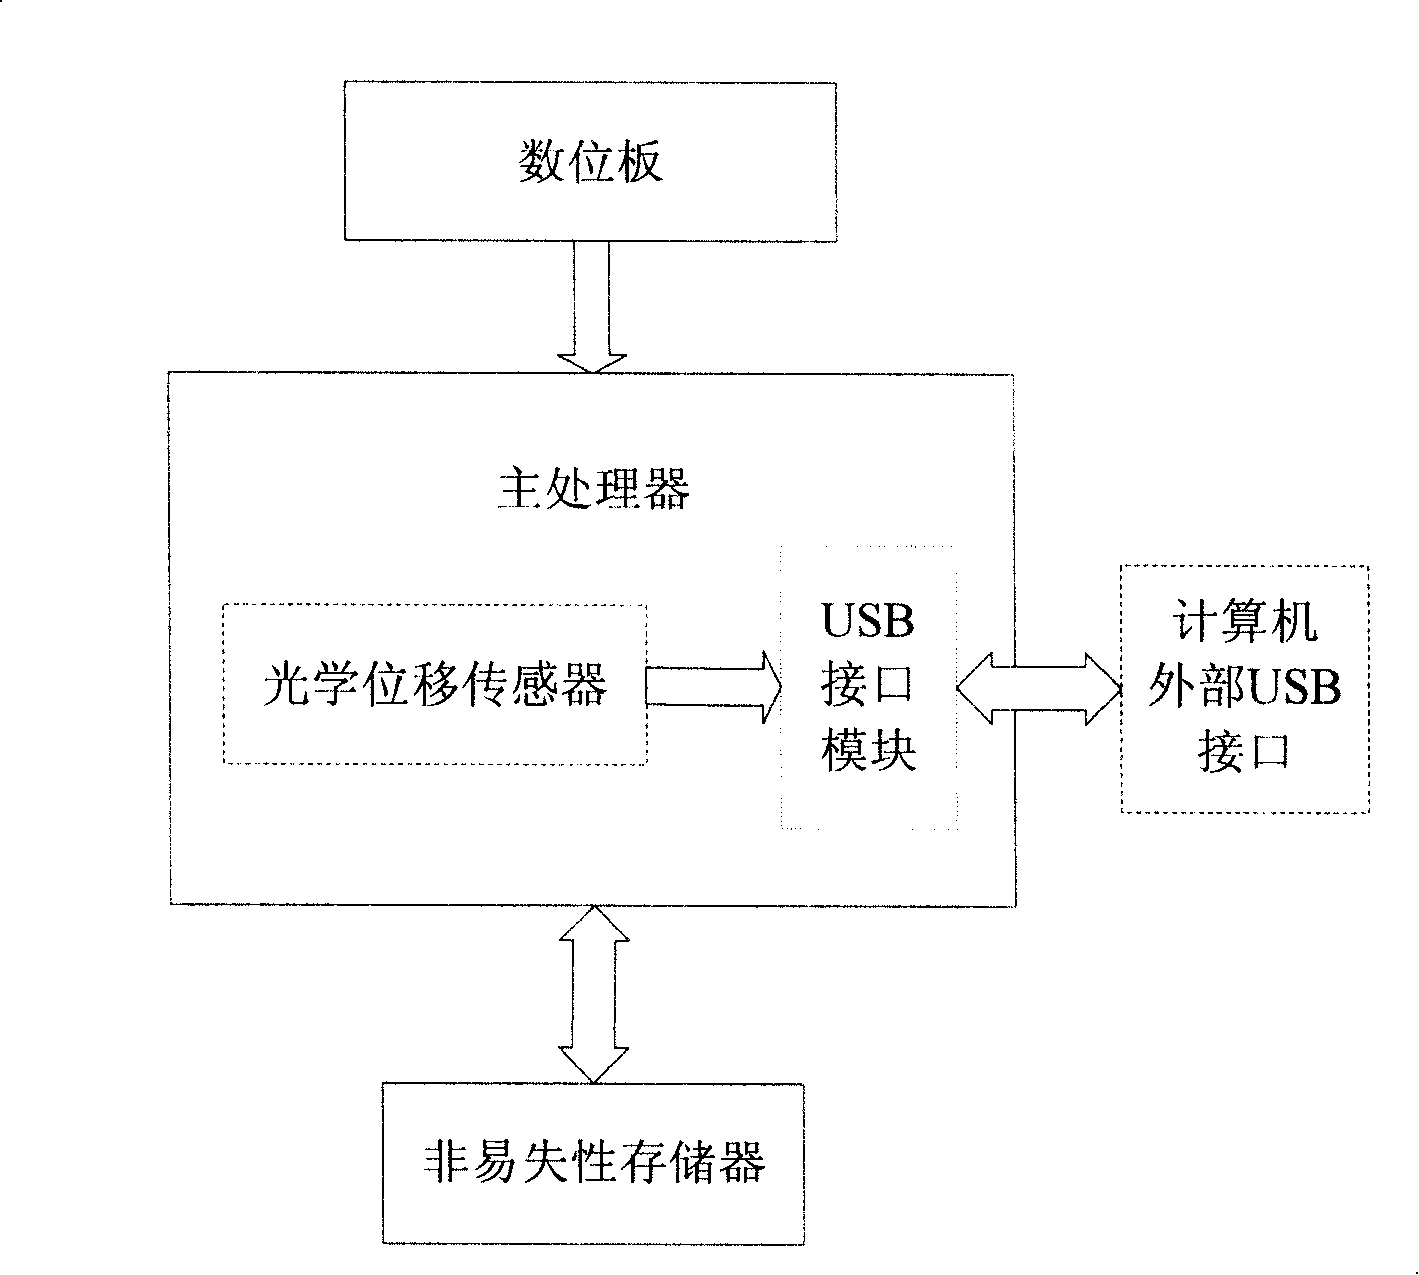 Mouse with mobile memory function and hand-written input function